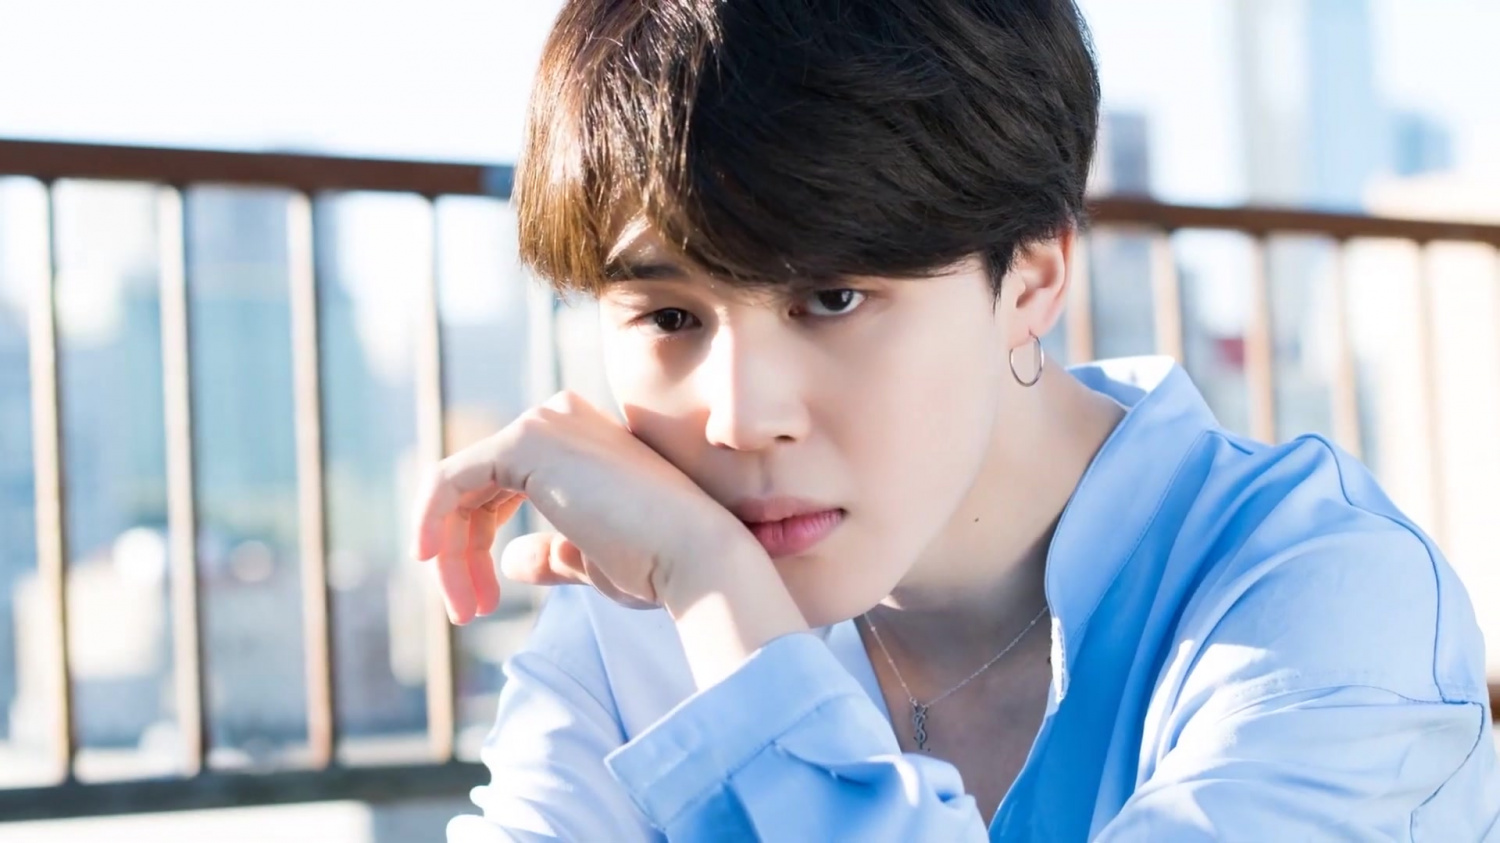 BTS Jimin Heartbreak: Singer Shares Sad Reality Of Being An Idol During ...